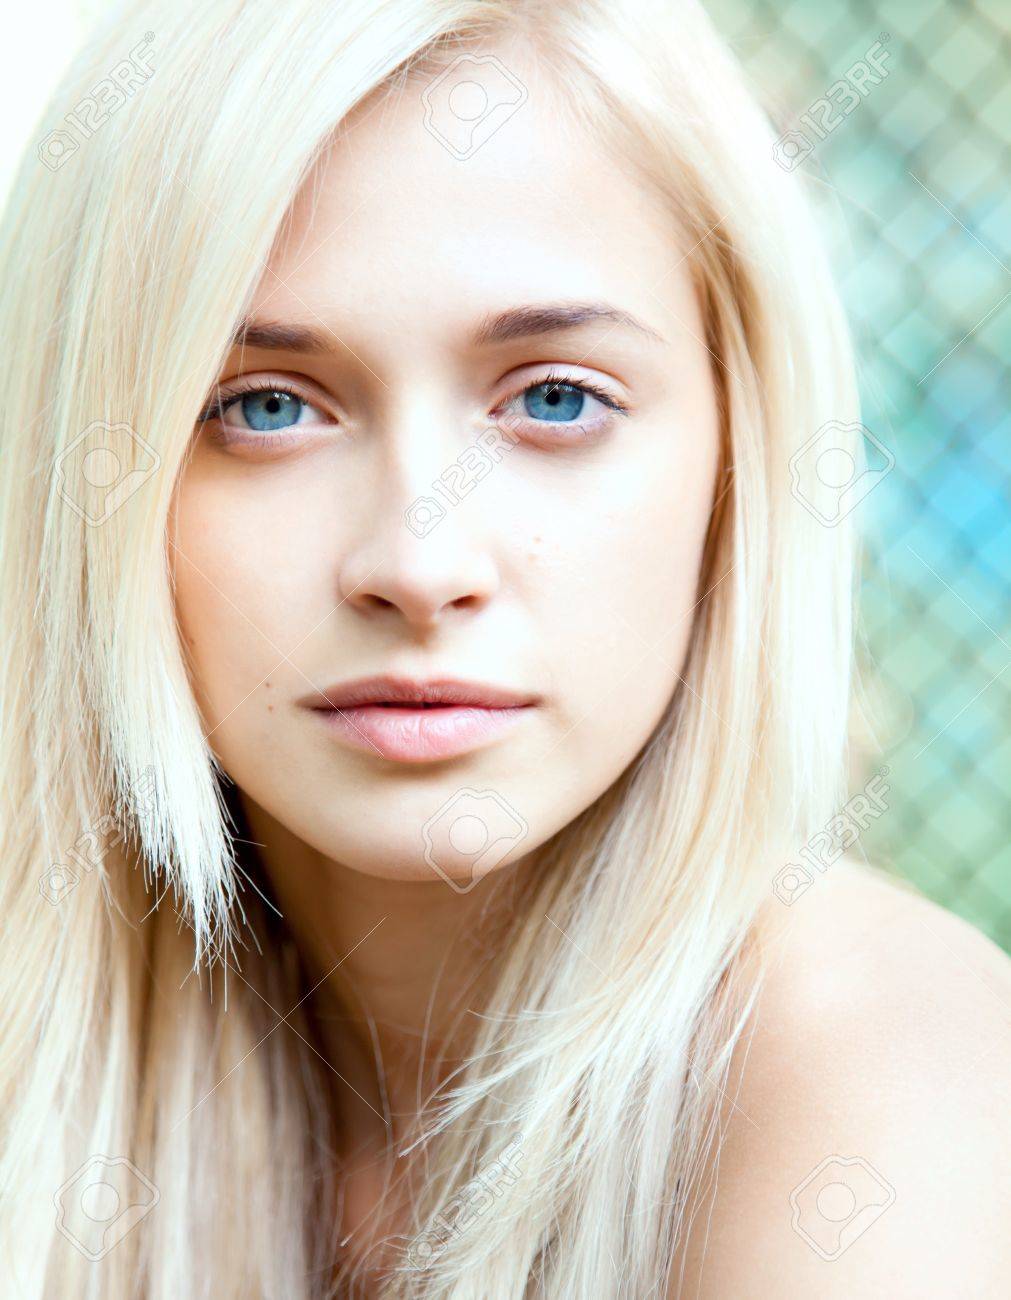 19381485-portrait-of-attractive-beautiful-blonde-girl-with-blue-eyes.jpg